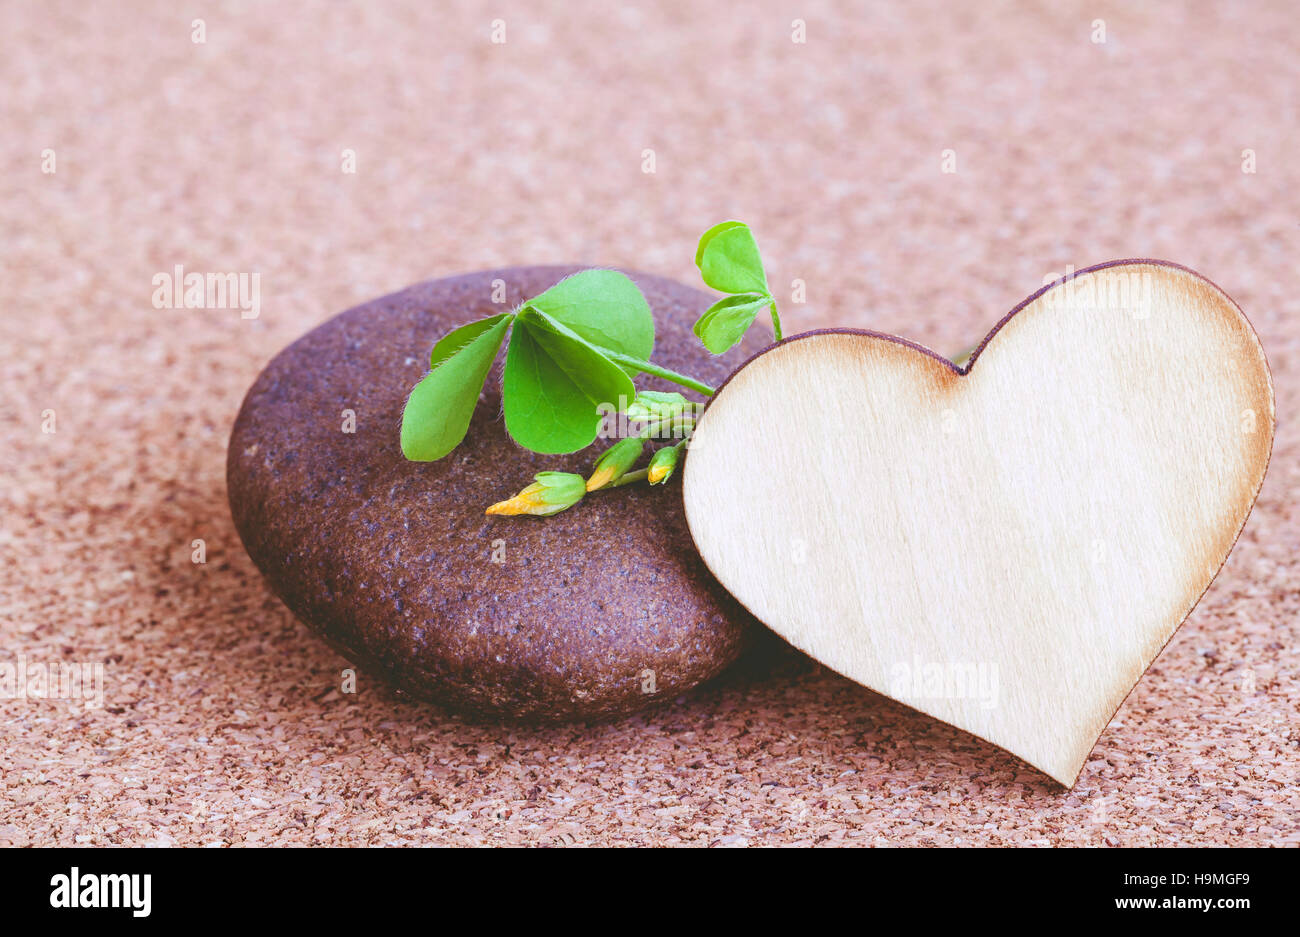 Closeup clover leaf and stone ,wooden heart on cork background. Stock Photo